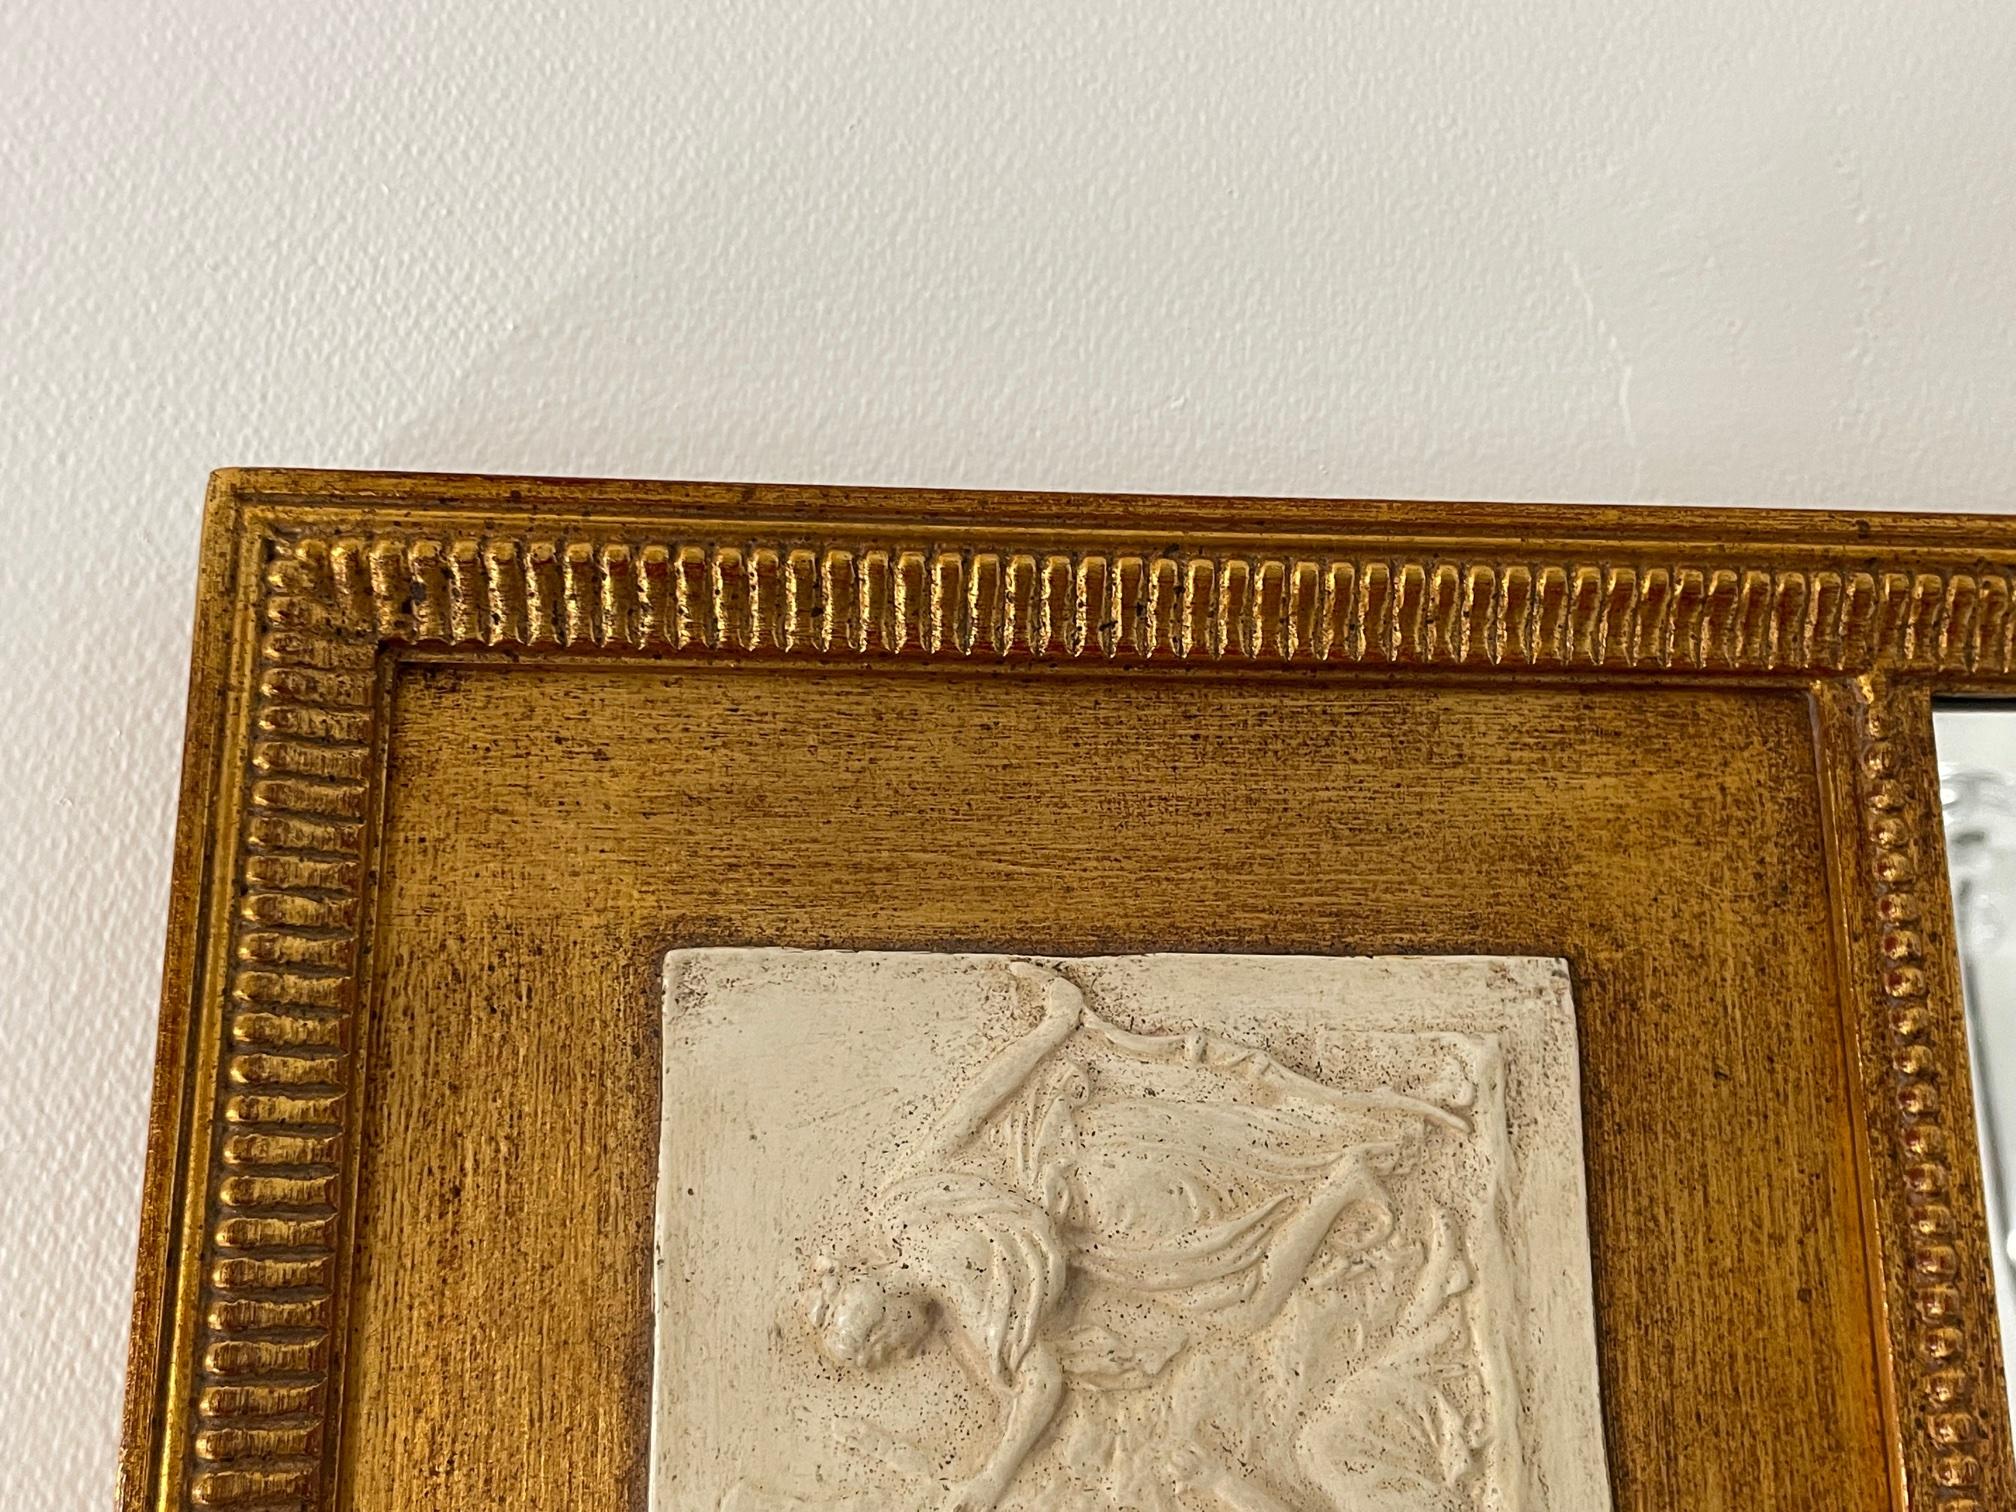 Neoclassical Superbly Elegant Gilded Florentine Mirror with Classical Relief Plaster Plaque